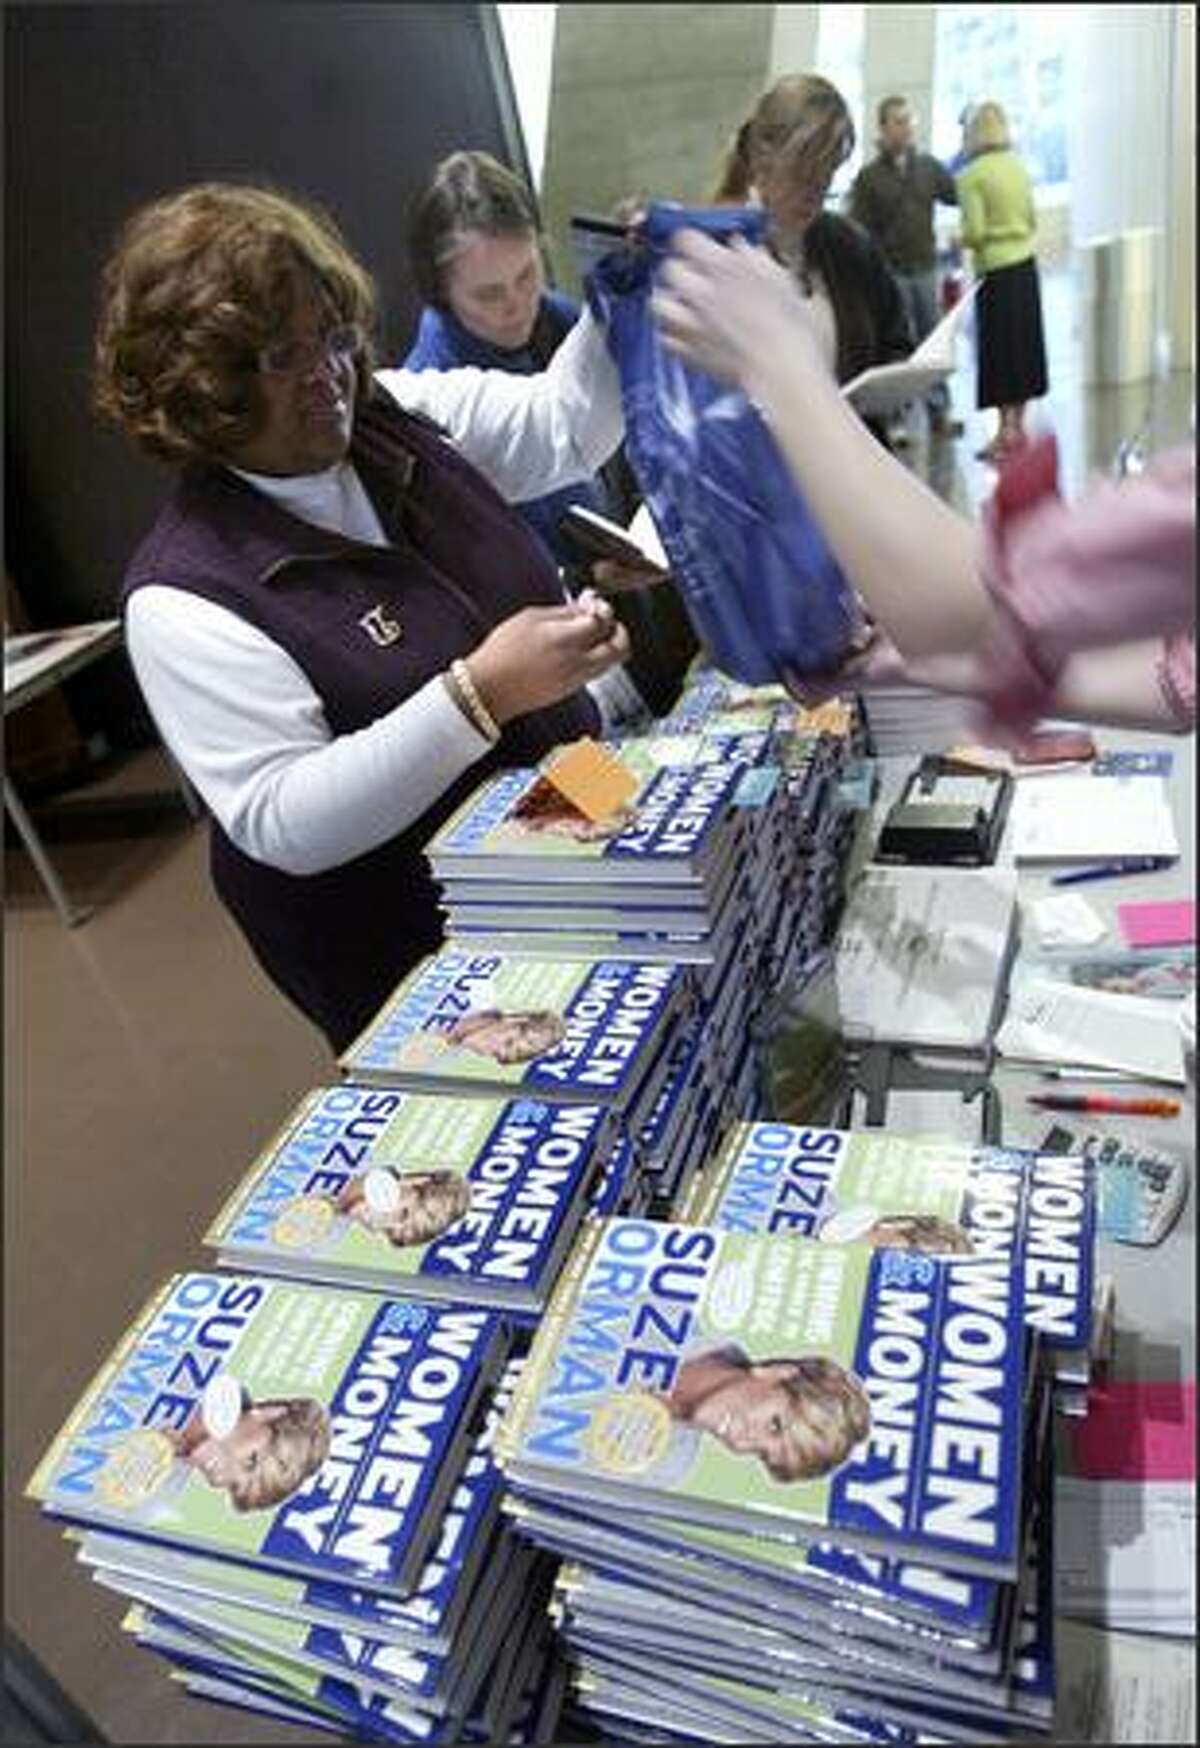 Tanya Jimale buys four copies of Suze Orman's book, Women & Money, for herself, an office mate and friends, prior to a speech and book signing by the finance expert at the downtown branch of the Seattle Public Library Monday.